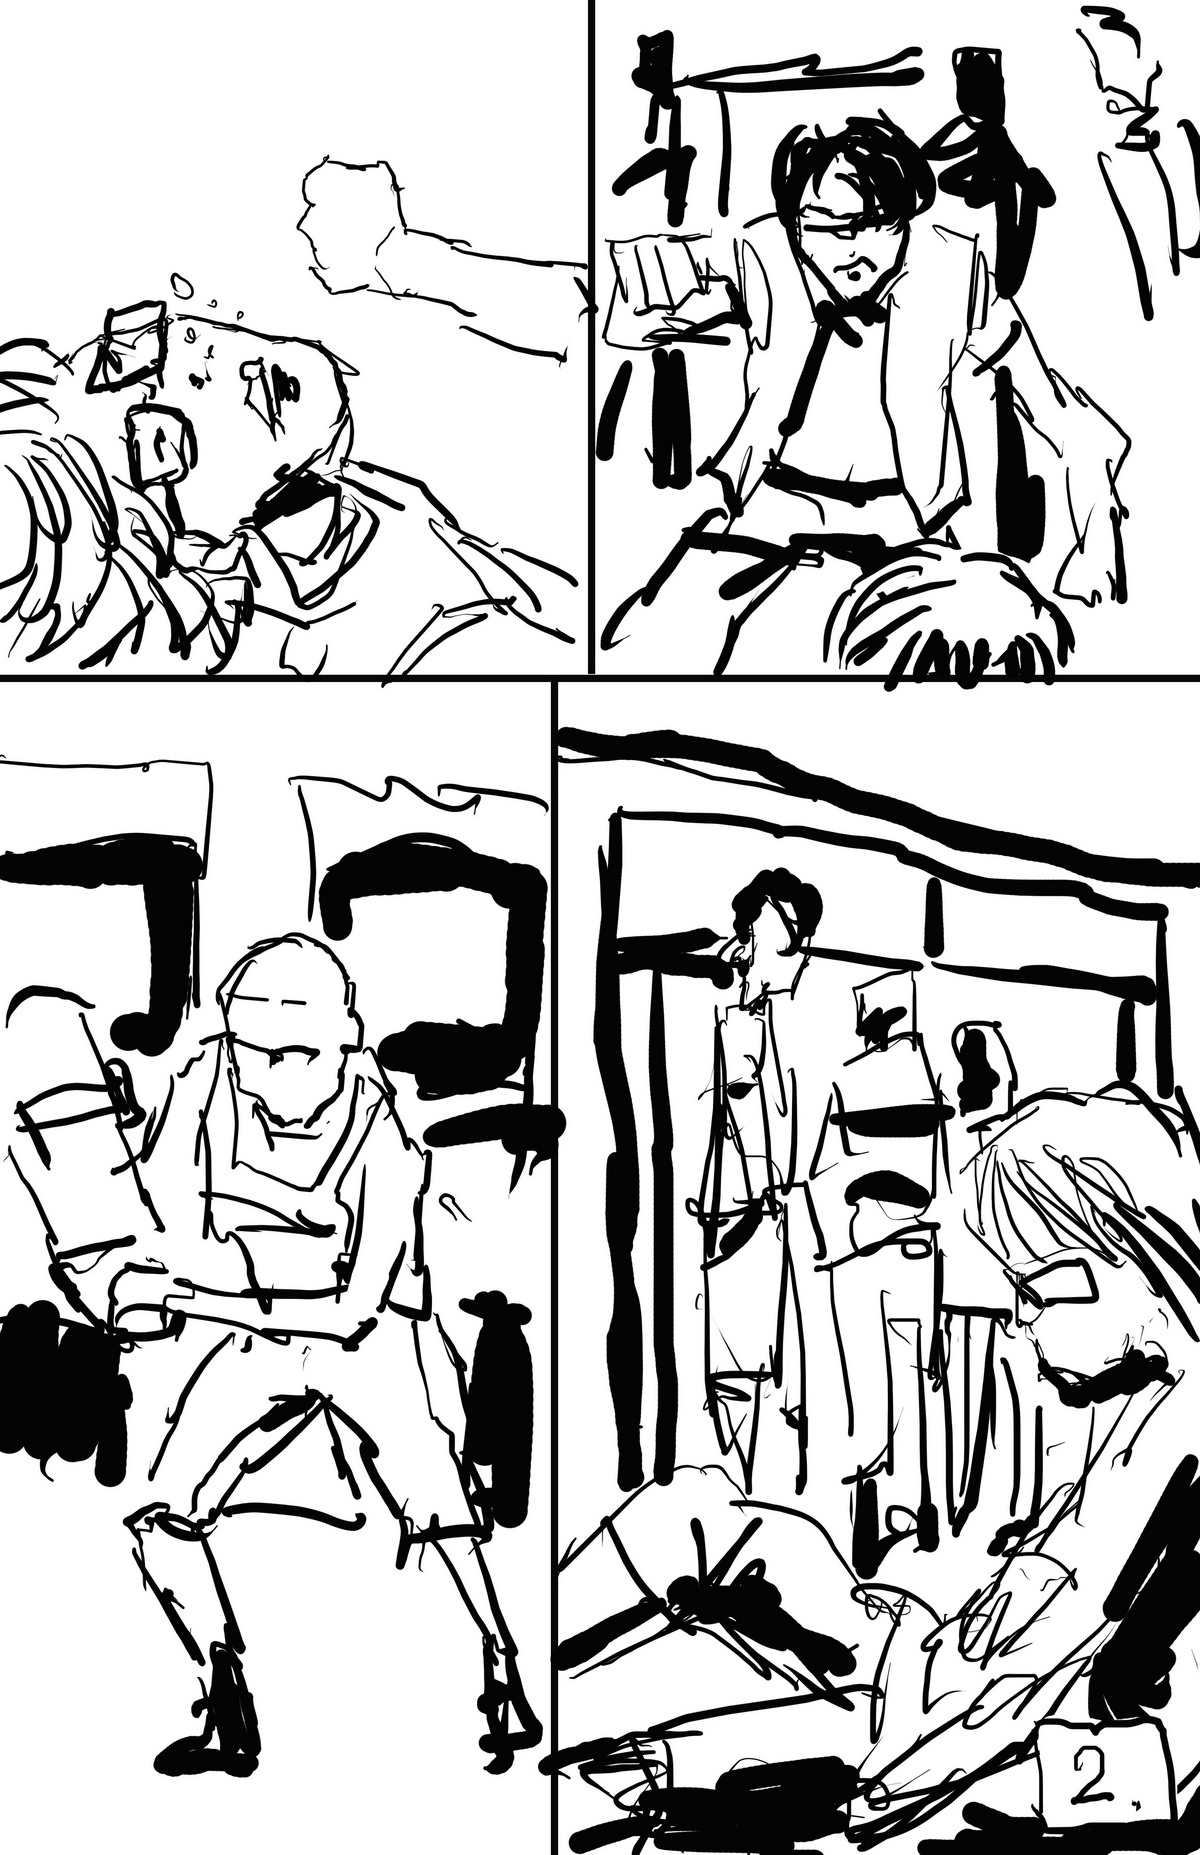 Solar Flare #4 - Page 2 Layout.jpg